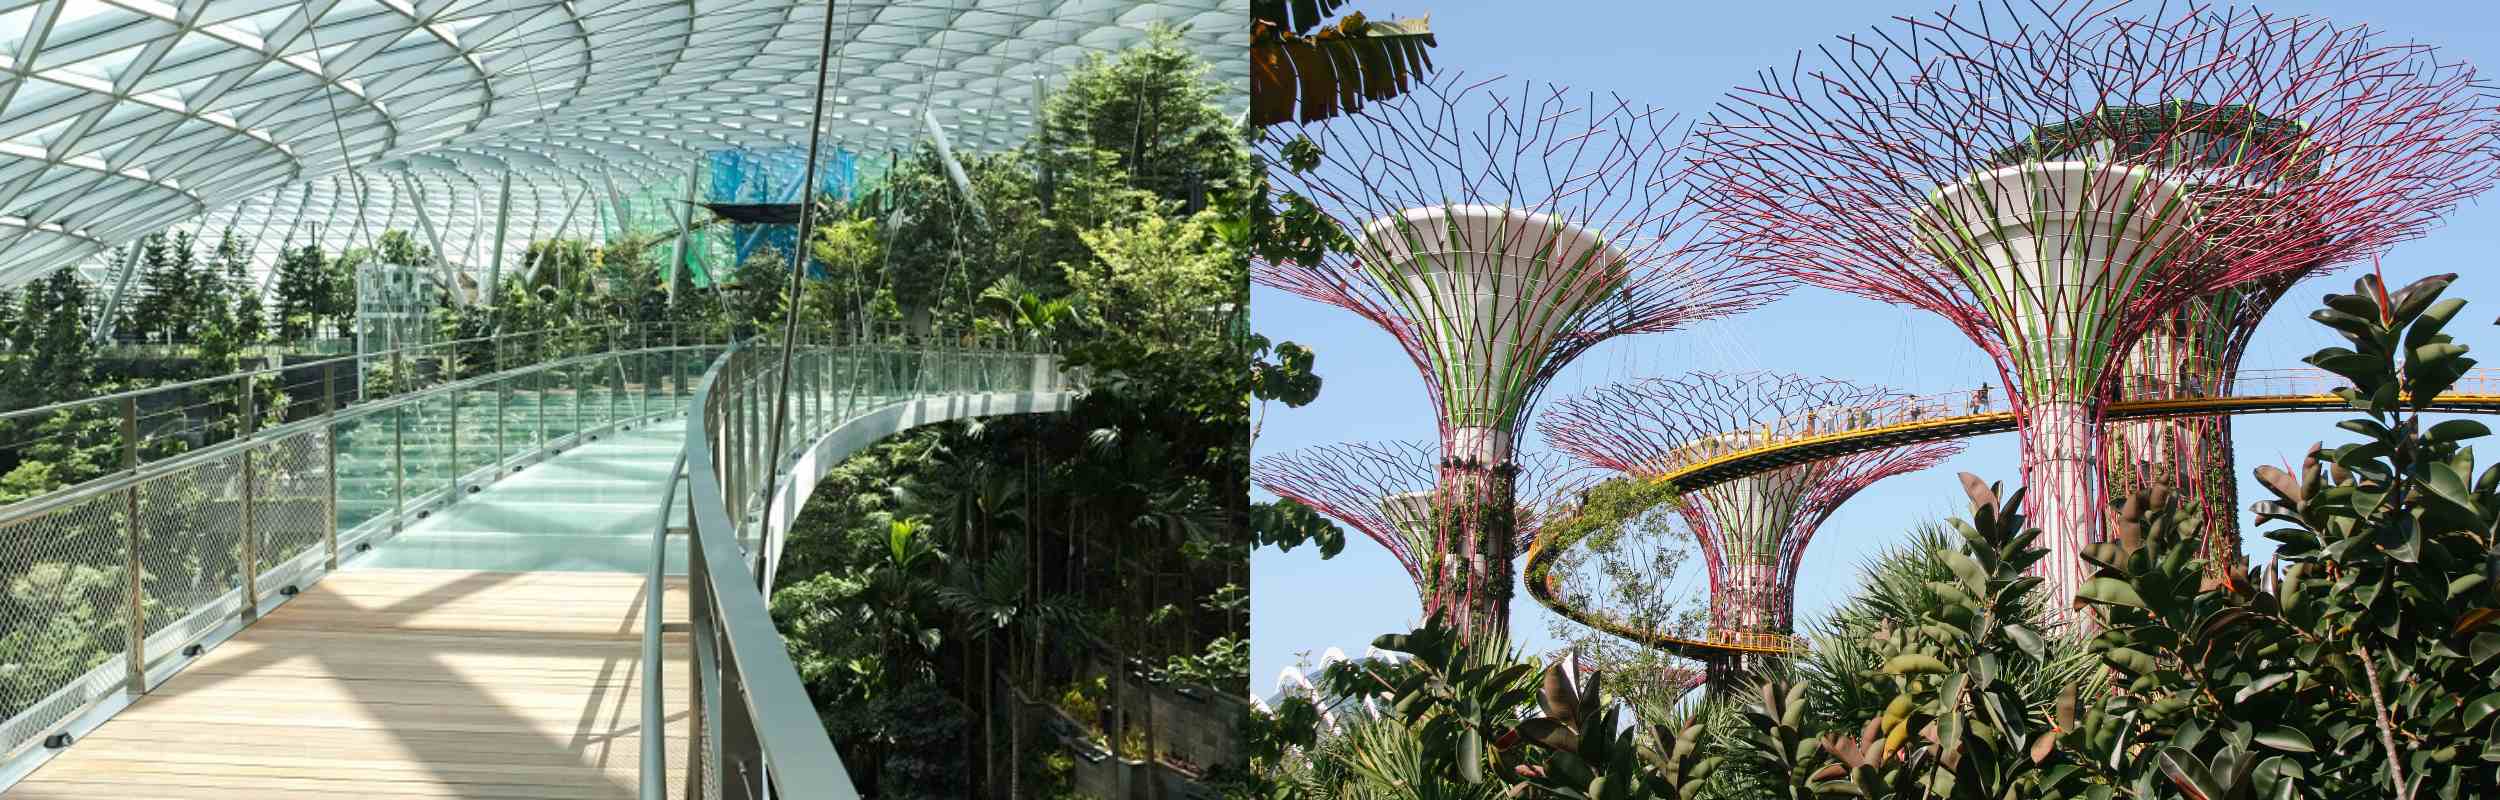 Jewel Changi Airport’s Canopy Bridge and Gardens by the Bay’s Supertree Grove